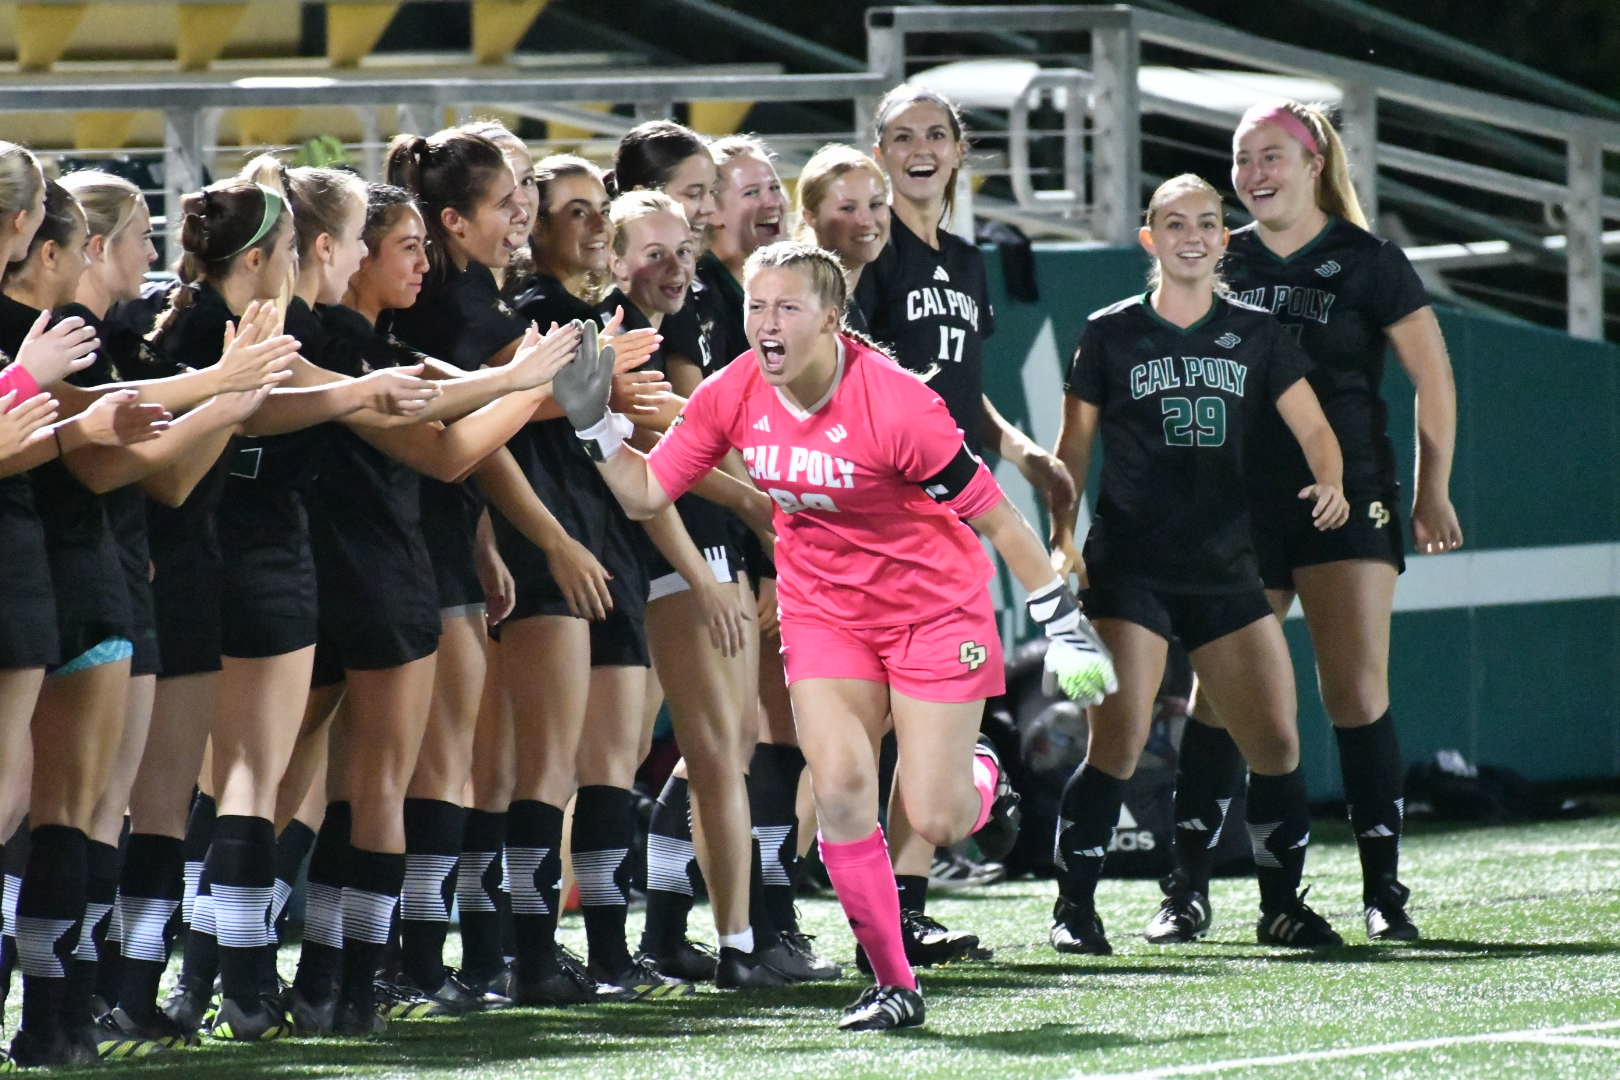 Cal Poly goalie Mac Samuel runs down the line of her teammates giving high-fives during a soccer game